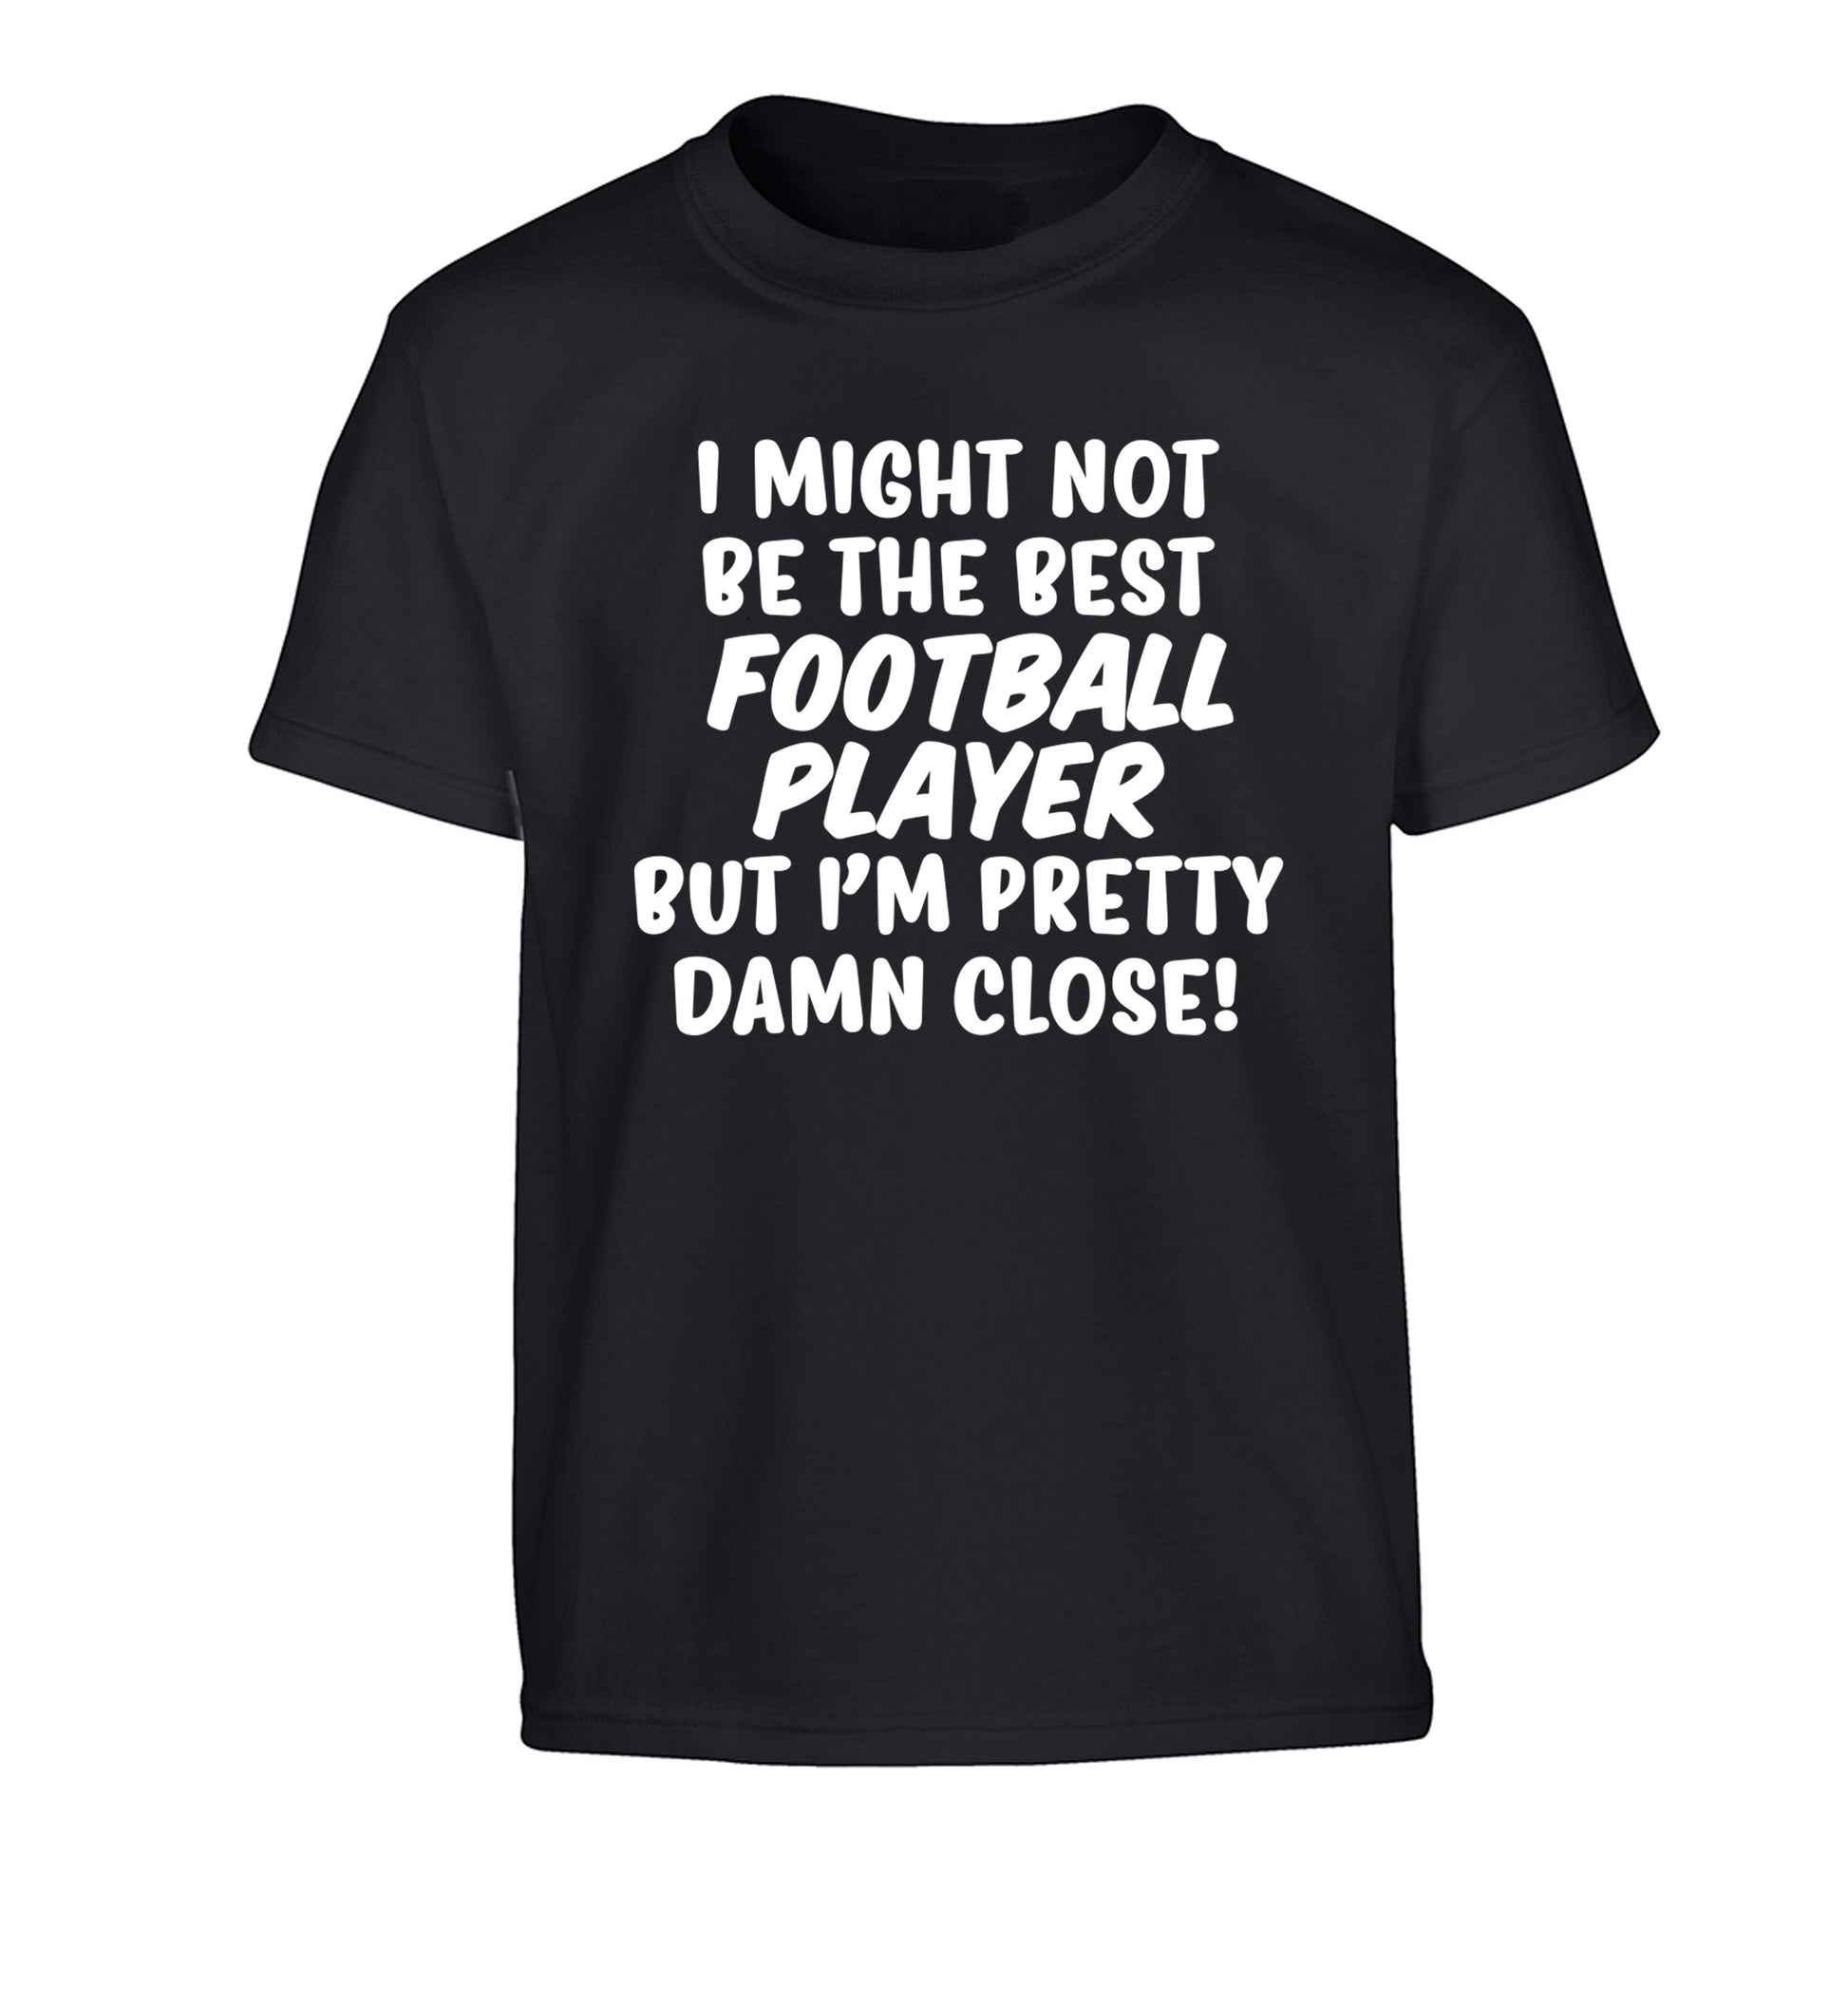 I might not be the best football player but I'm pretty close! Children's black Tshirt 12-14 Years